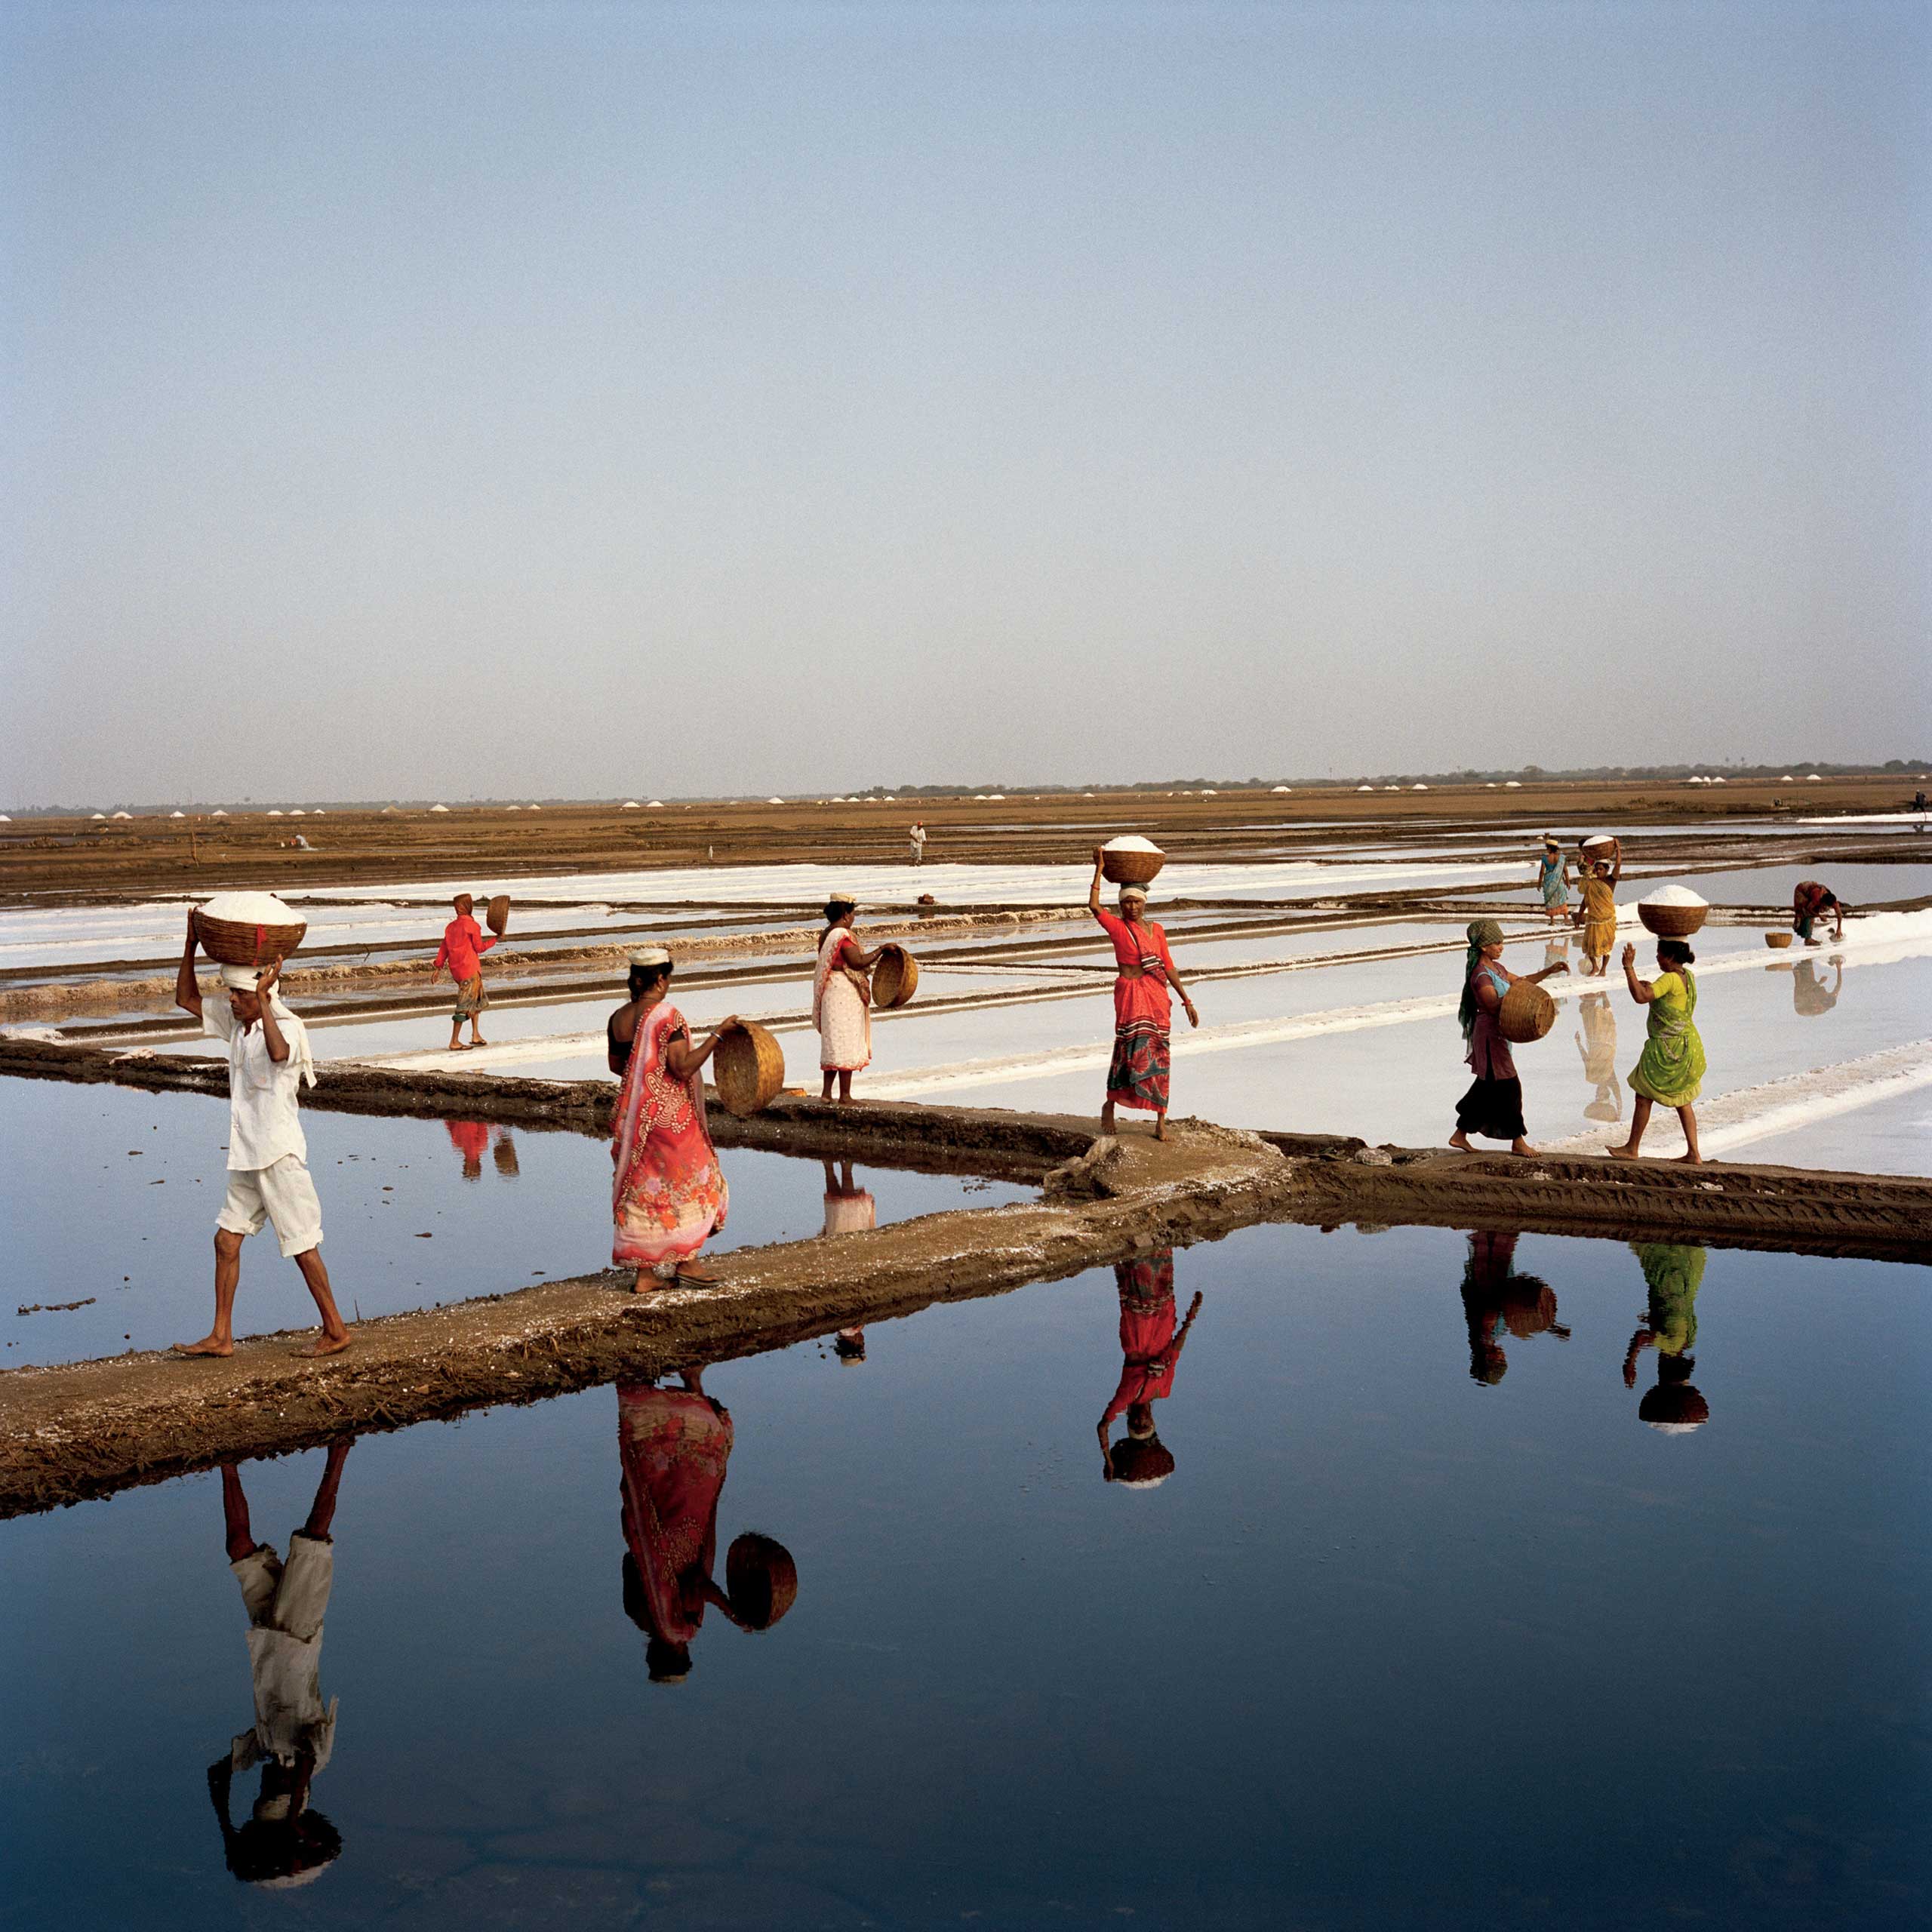 From the July issue of National Geographic magazine:  In the Footsteps of Gandhi
                              Workers harvest salt in Dharasana, Gujarat. In May 1930, the month after Gandhi led a march to protest British restrictions on salt, activists trained in nonviolent resistance marched here and were savagely beaten, a seminal event that advanced India’s drive for independence.